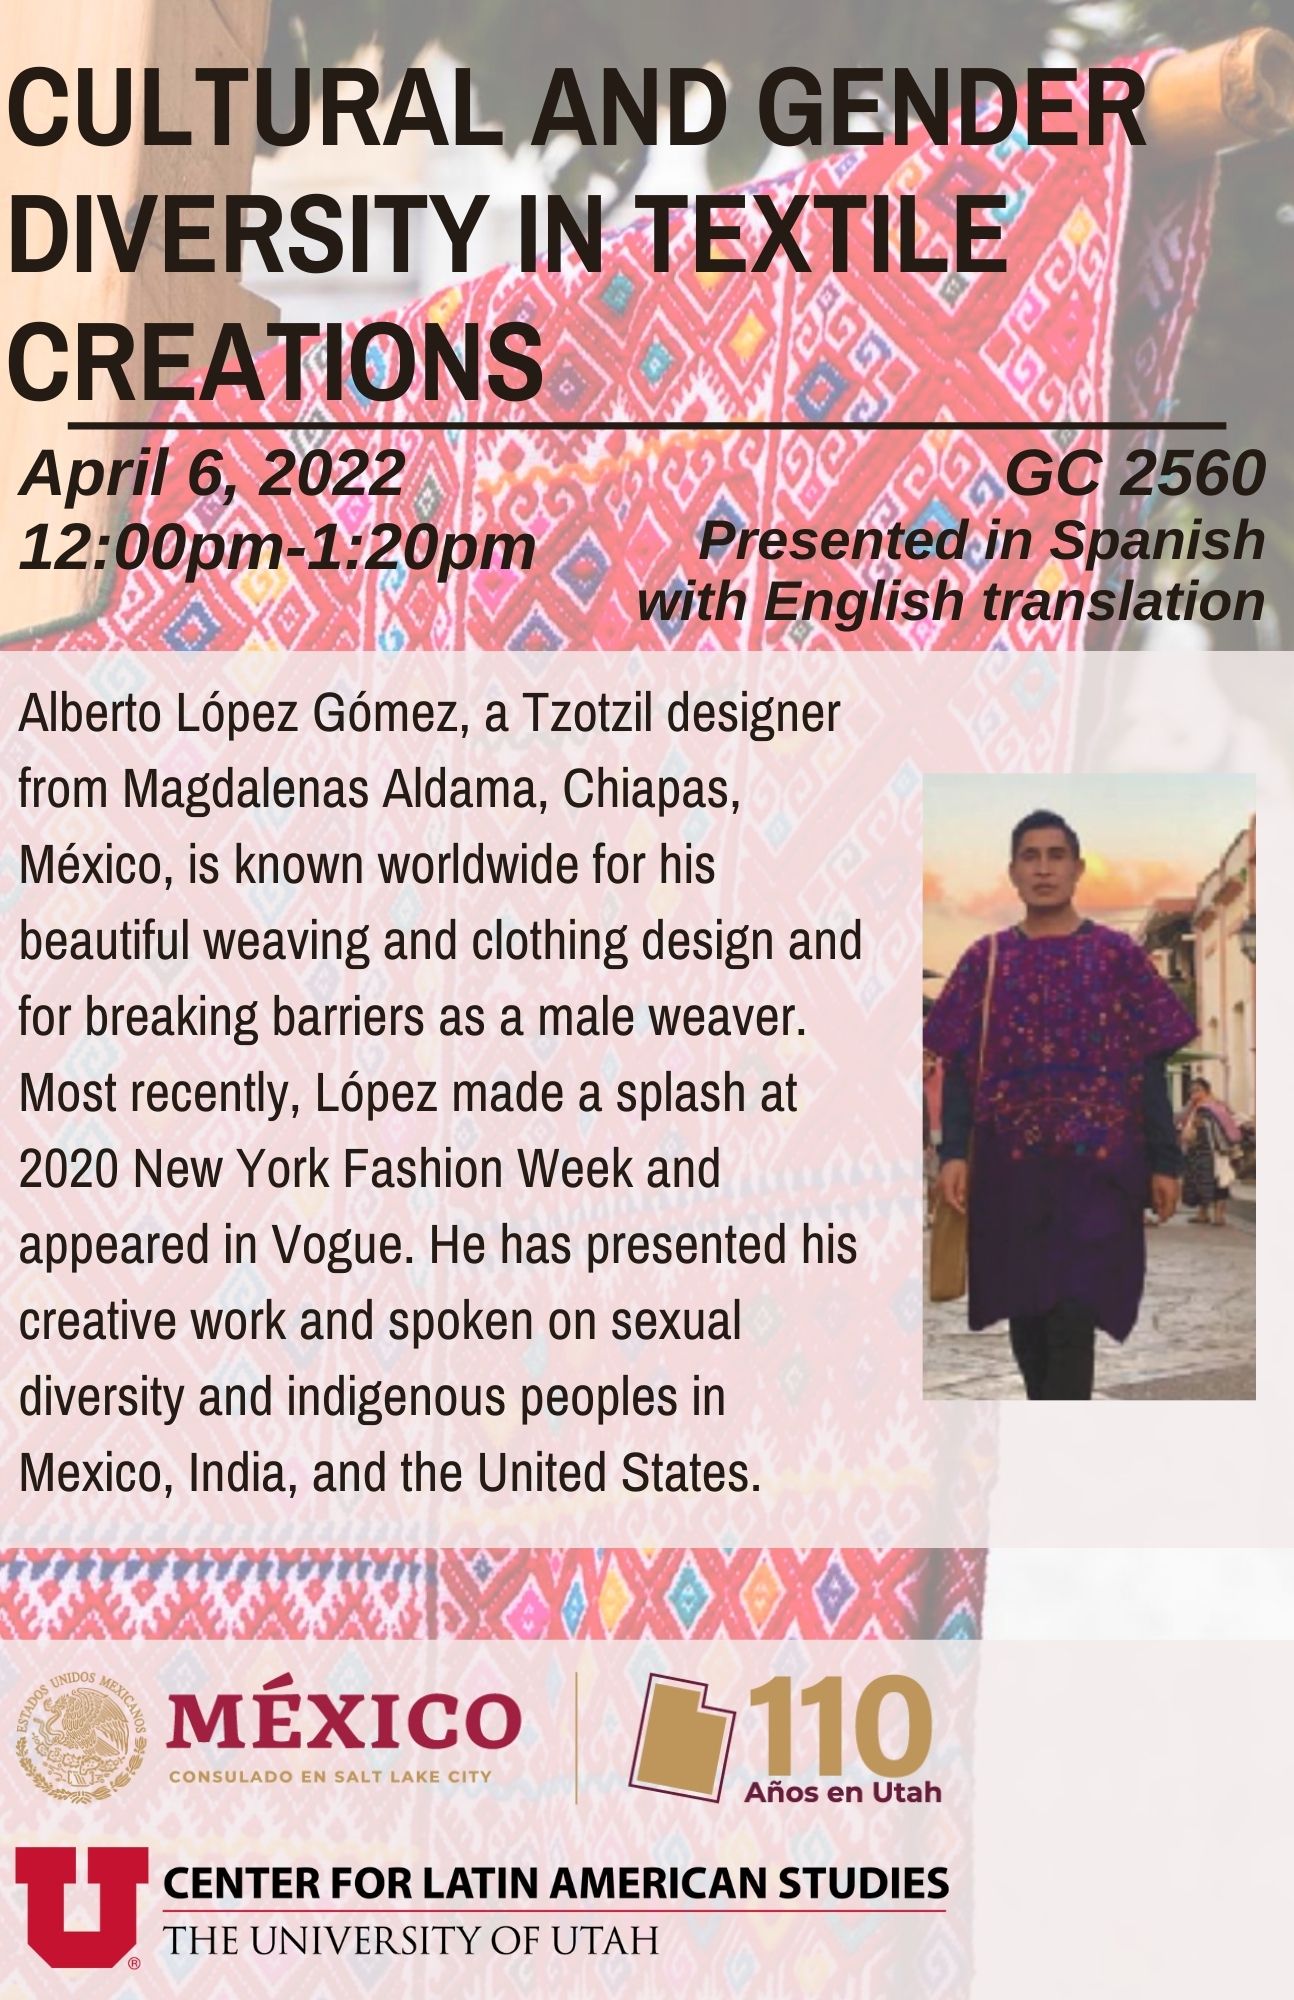 Culture and Gender Diversity in Textile Creations flyer